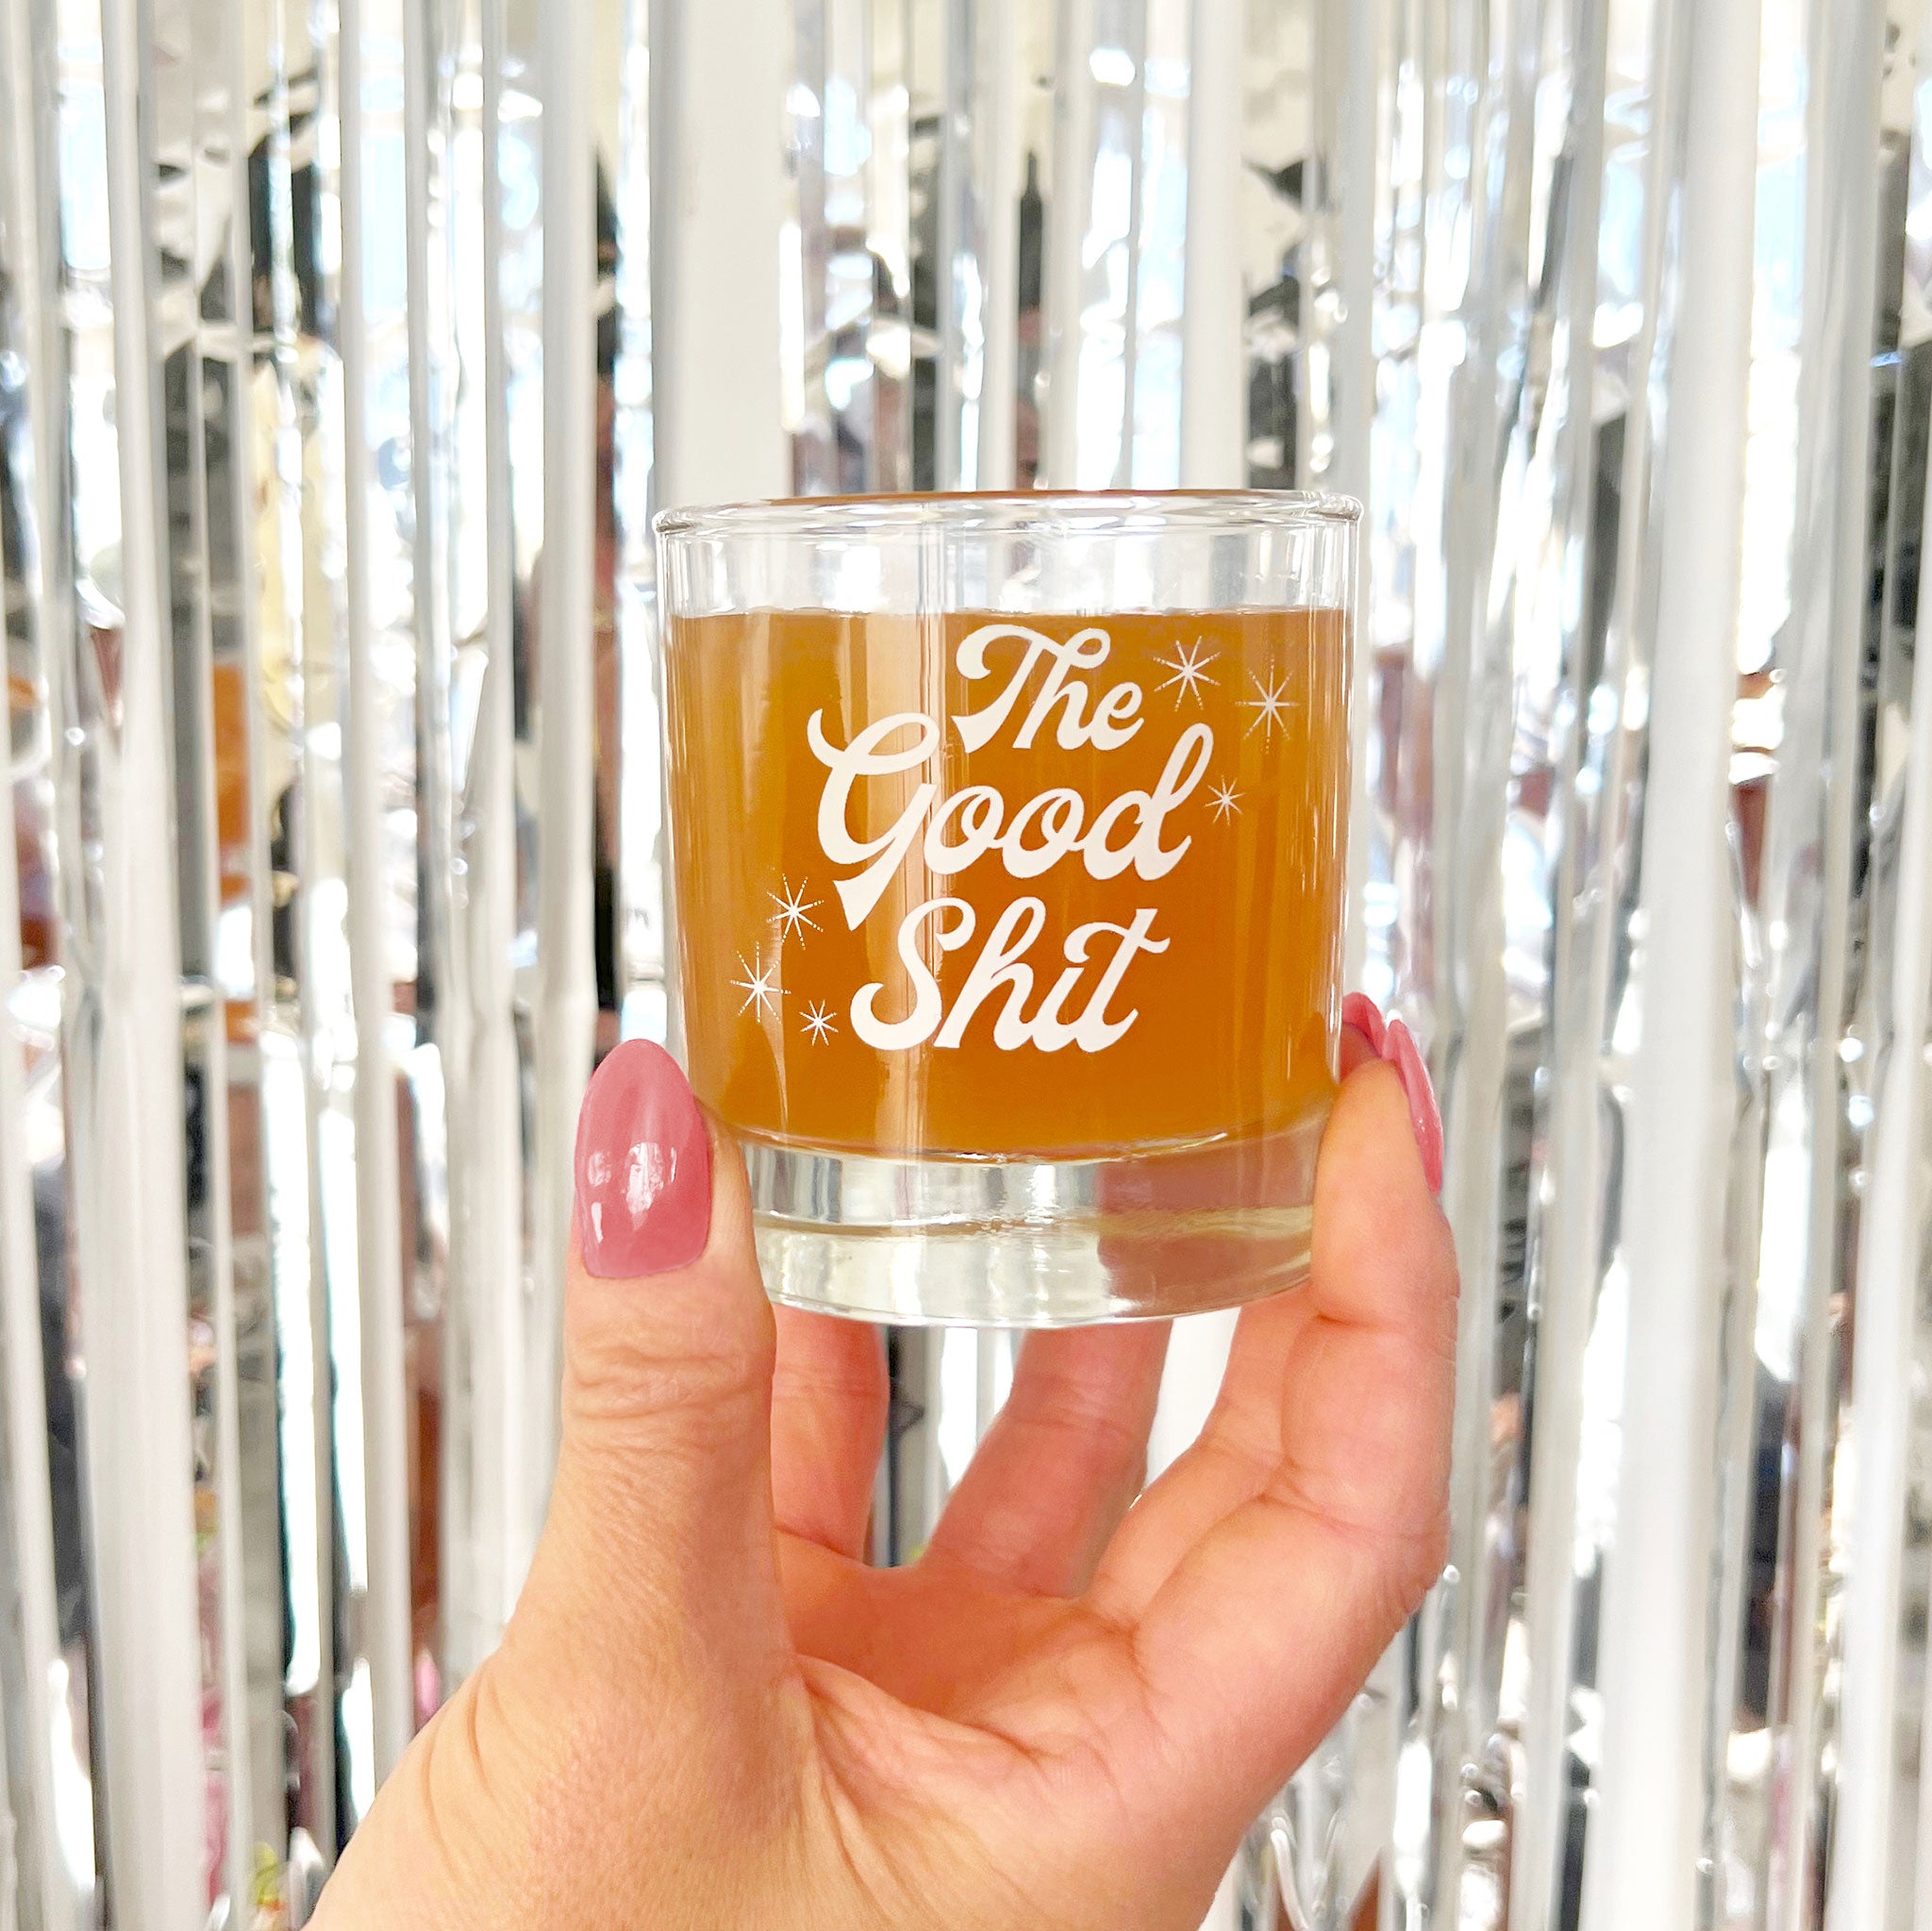 Against a silver tinsel backdrop is a photograph of a short glass tumbler with a thick bottom and &quot;The Good Shit&quot; printed across the center in white groovy cursive text.